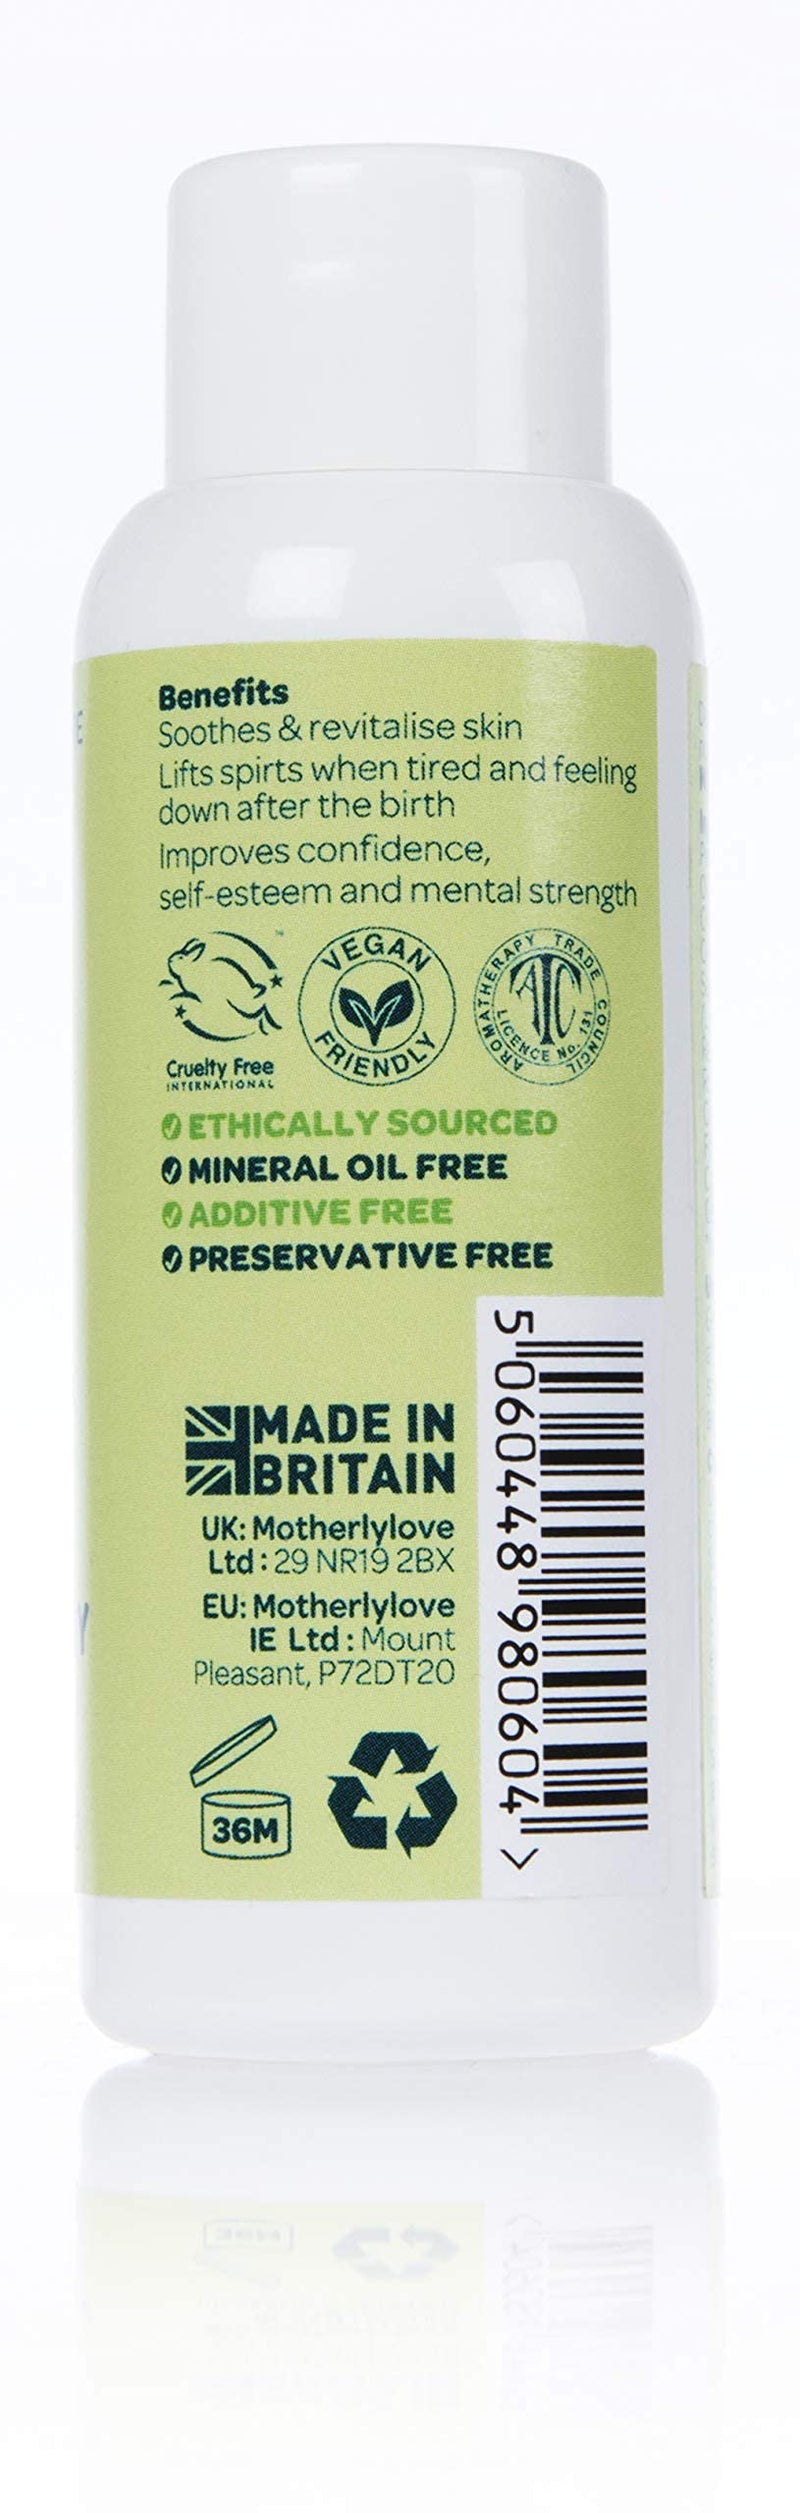 [Australia] - Motherlylove PURE LUXURY REVITALISING Body Oil | 100% Natural & Vegan Rose, Chamomile & Lavender Essential Oils | Soothes Aches & Pains, Relaxes & Uplifts | Made in UK | Created by an Expert Midwife 